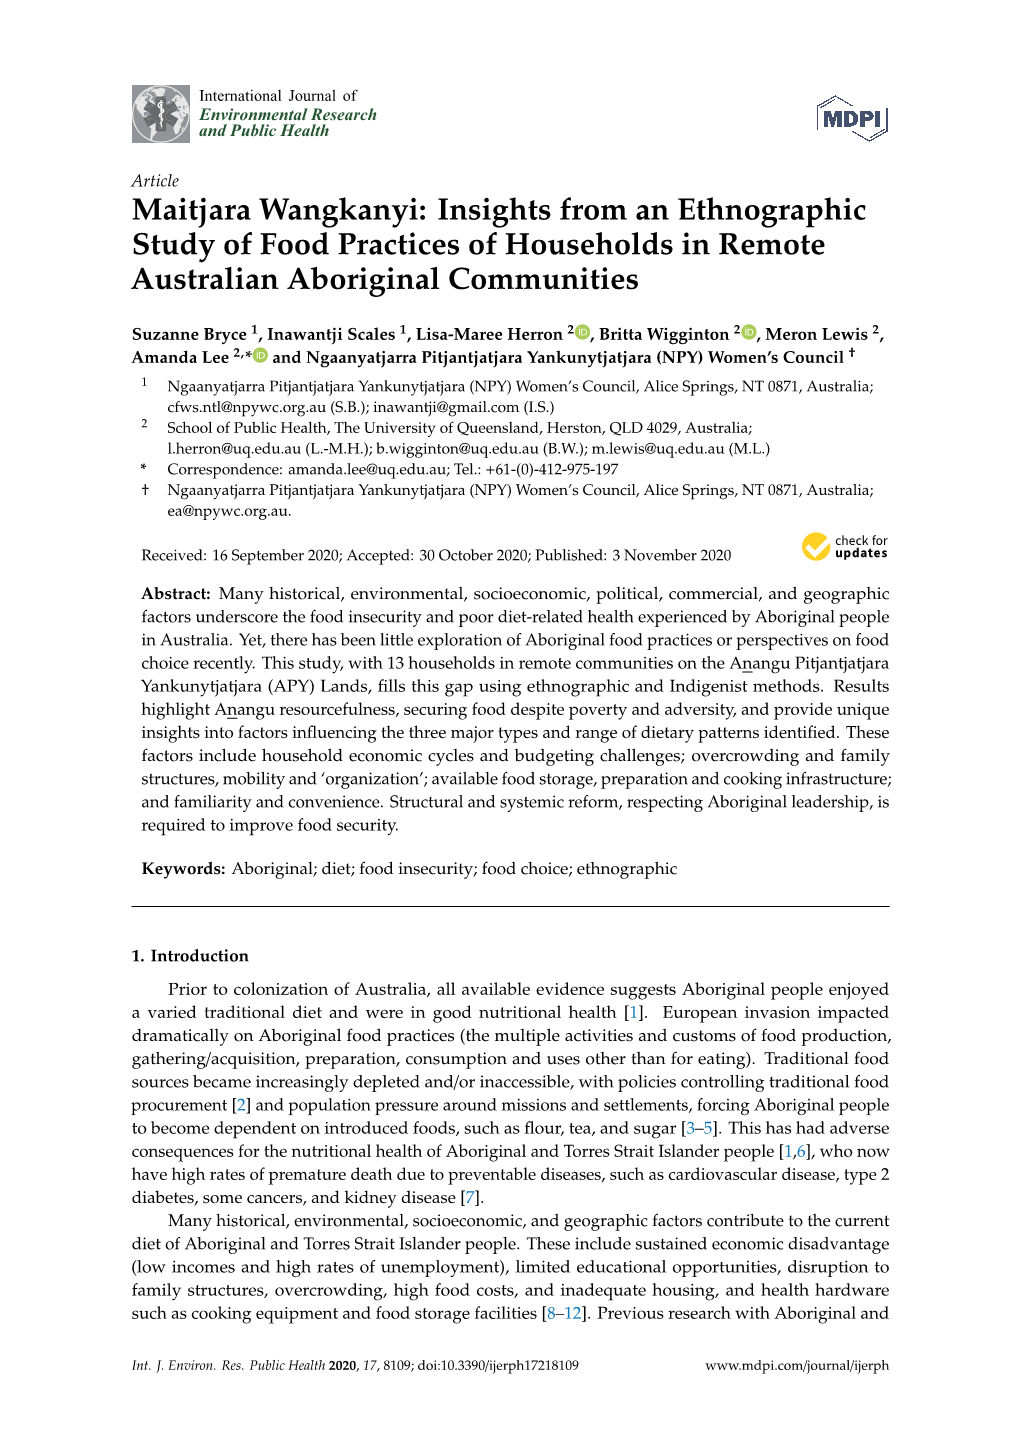 Maitjara Wangkanyi: Insights from an Ethnographic Study of Food Practices of Households in Remote Australian Aboriginal Communities